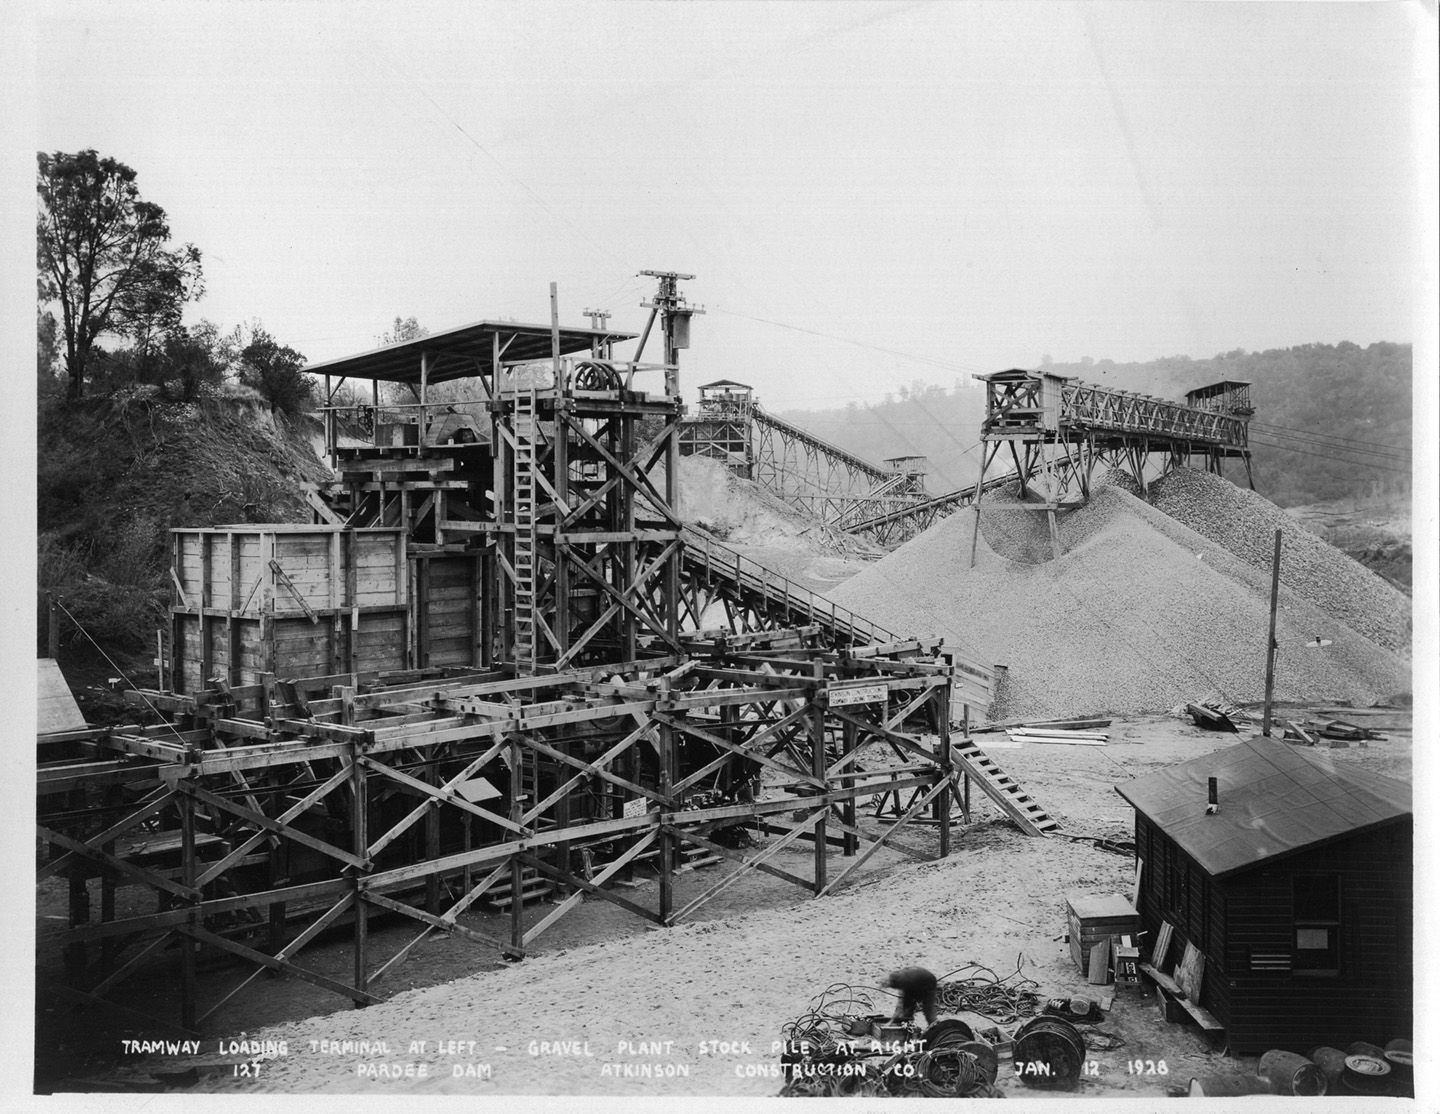 Tramway loading terminal at left - gravel plant stockpile at right. (January 1928)